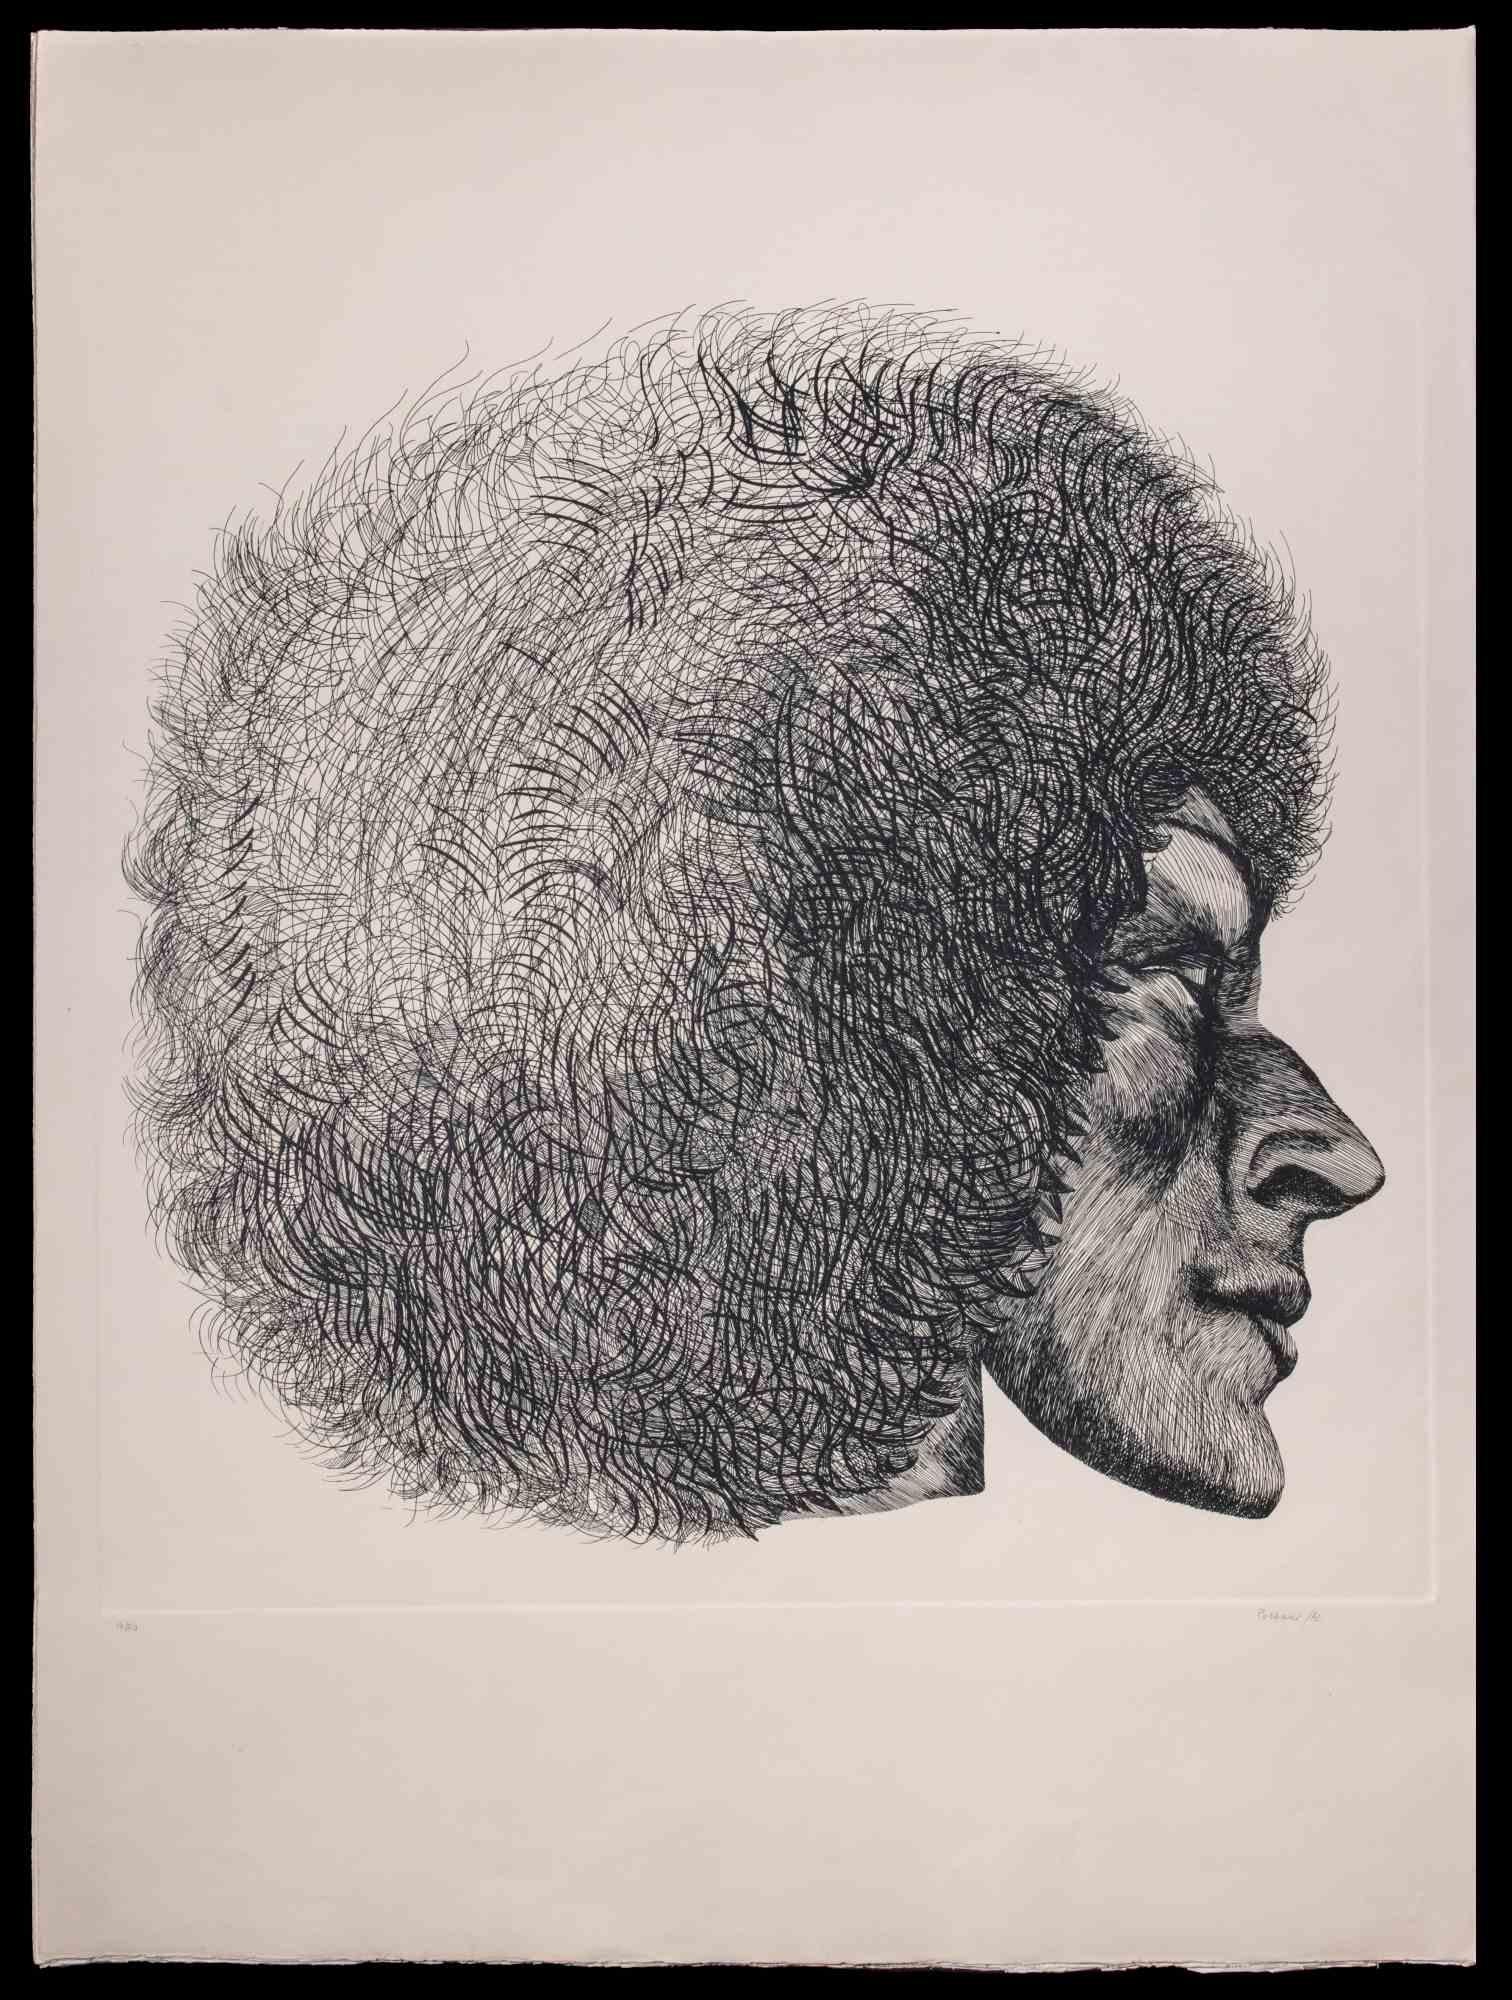 Profile is a modern artwork realized by the Italian artist Giacomo Porzano (1925-2006) in 1972.

Black and white etching.

Hand-signed and dated on the lower right.

Numbered on the lower left. Edition of 13/50.

Giacomo Porzano was born in Lerici